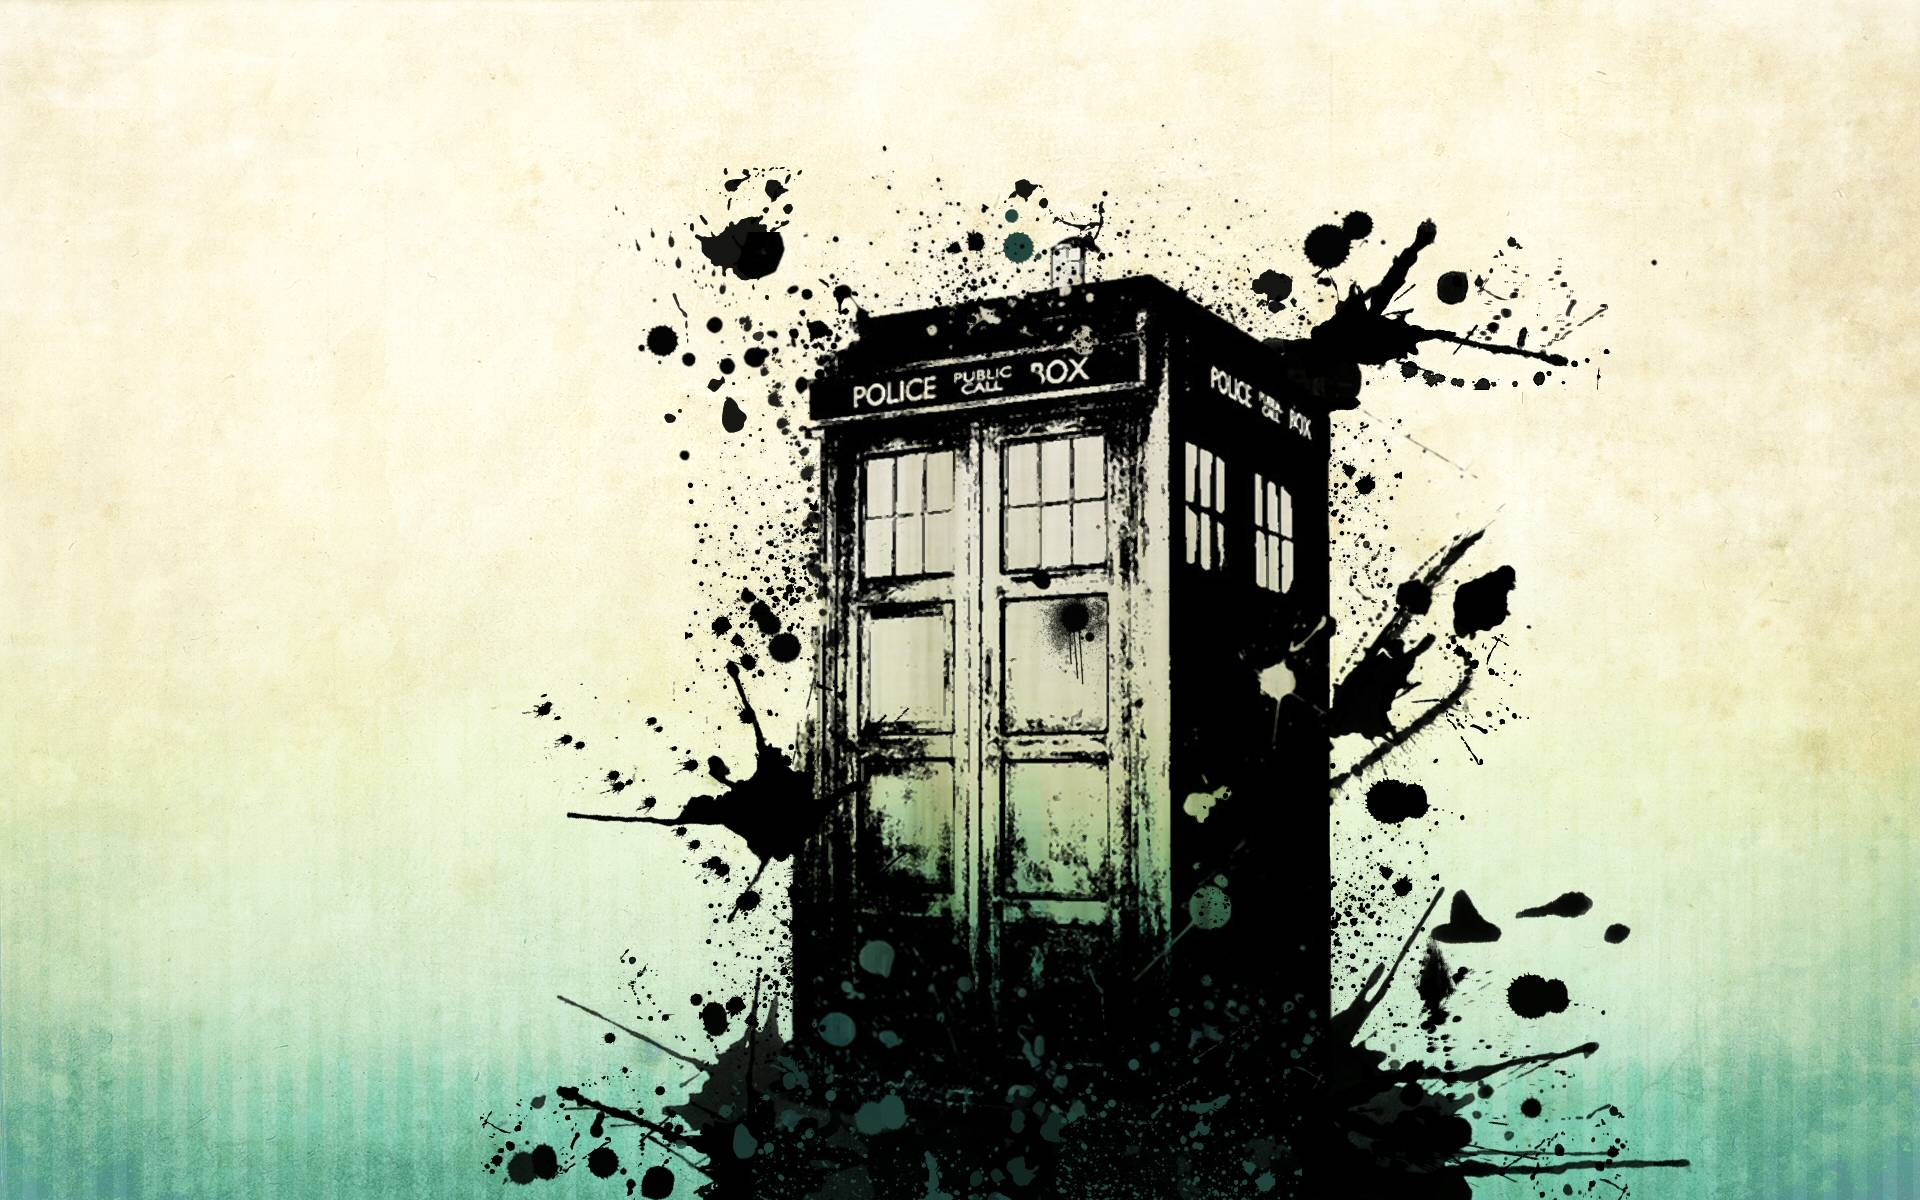 Doctor Who wallpaper